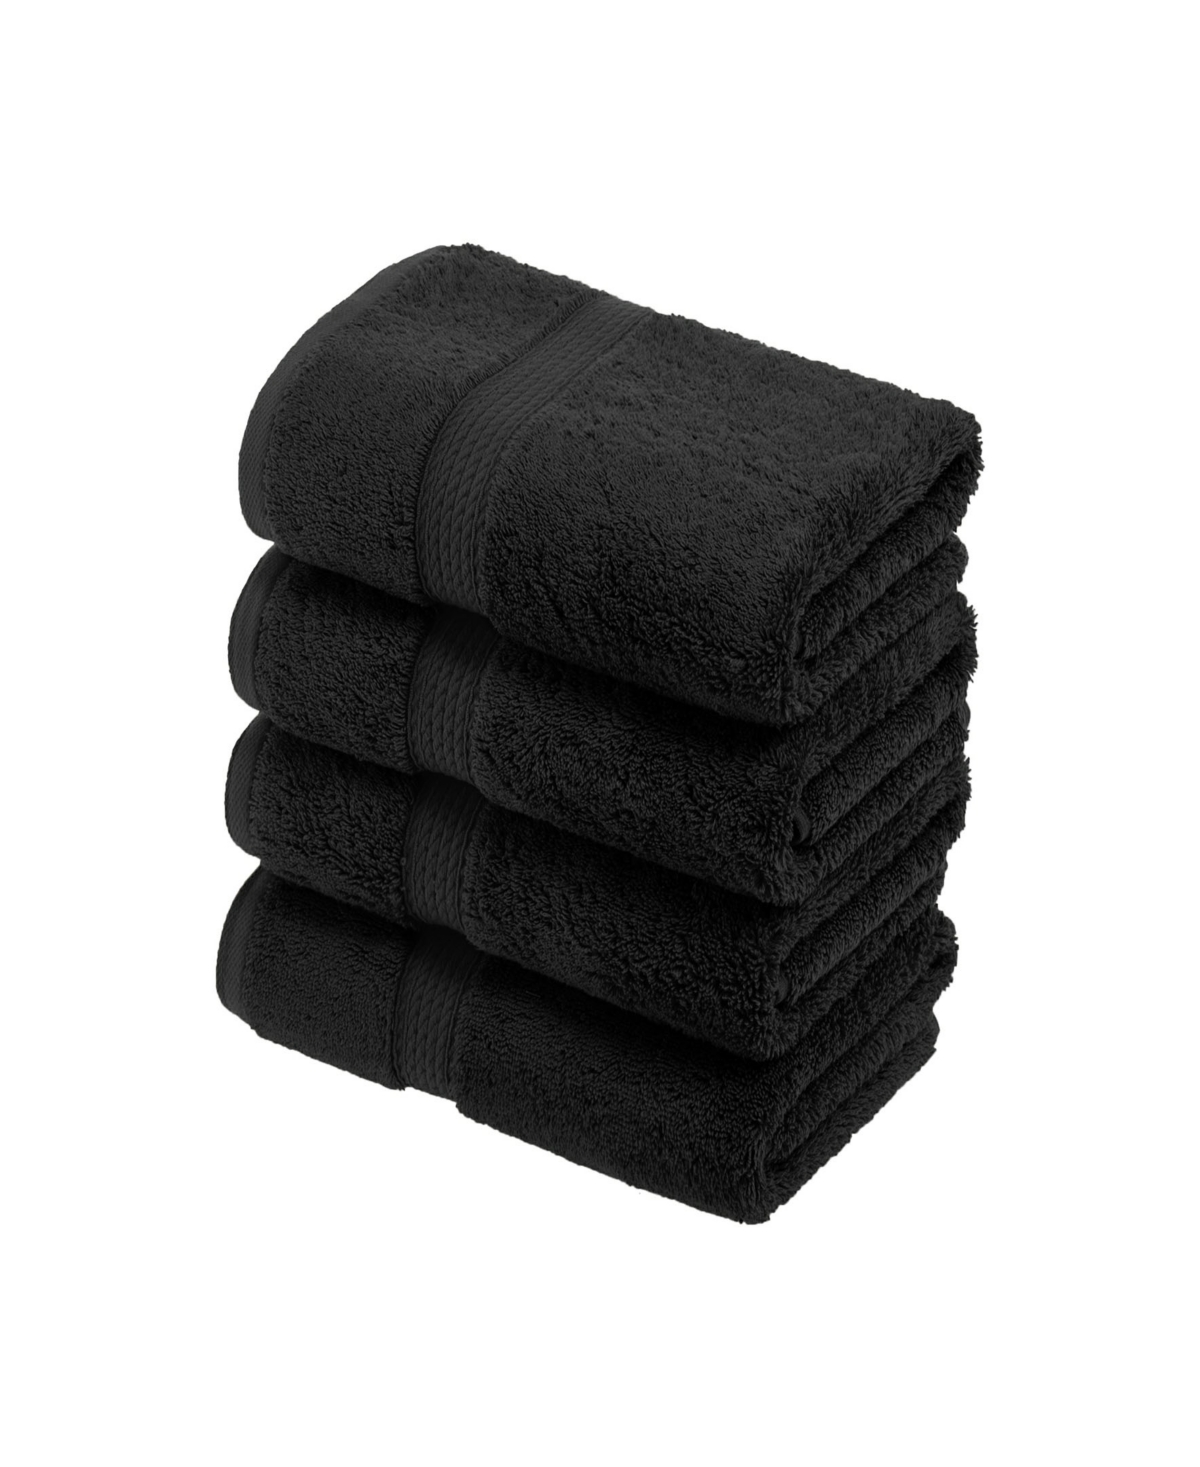 Superior Highly Absorbent 4 Piece Egyptian Cotton Ultra Plush Solid Hand Towel Set Bedding In Black